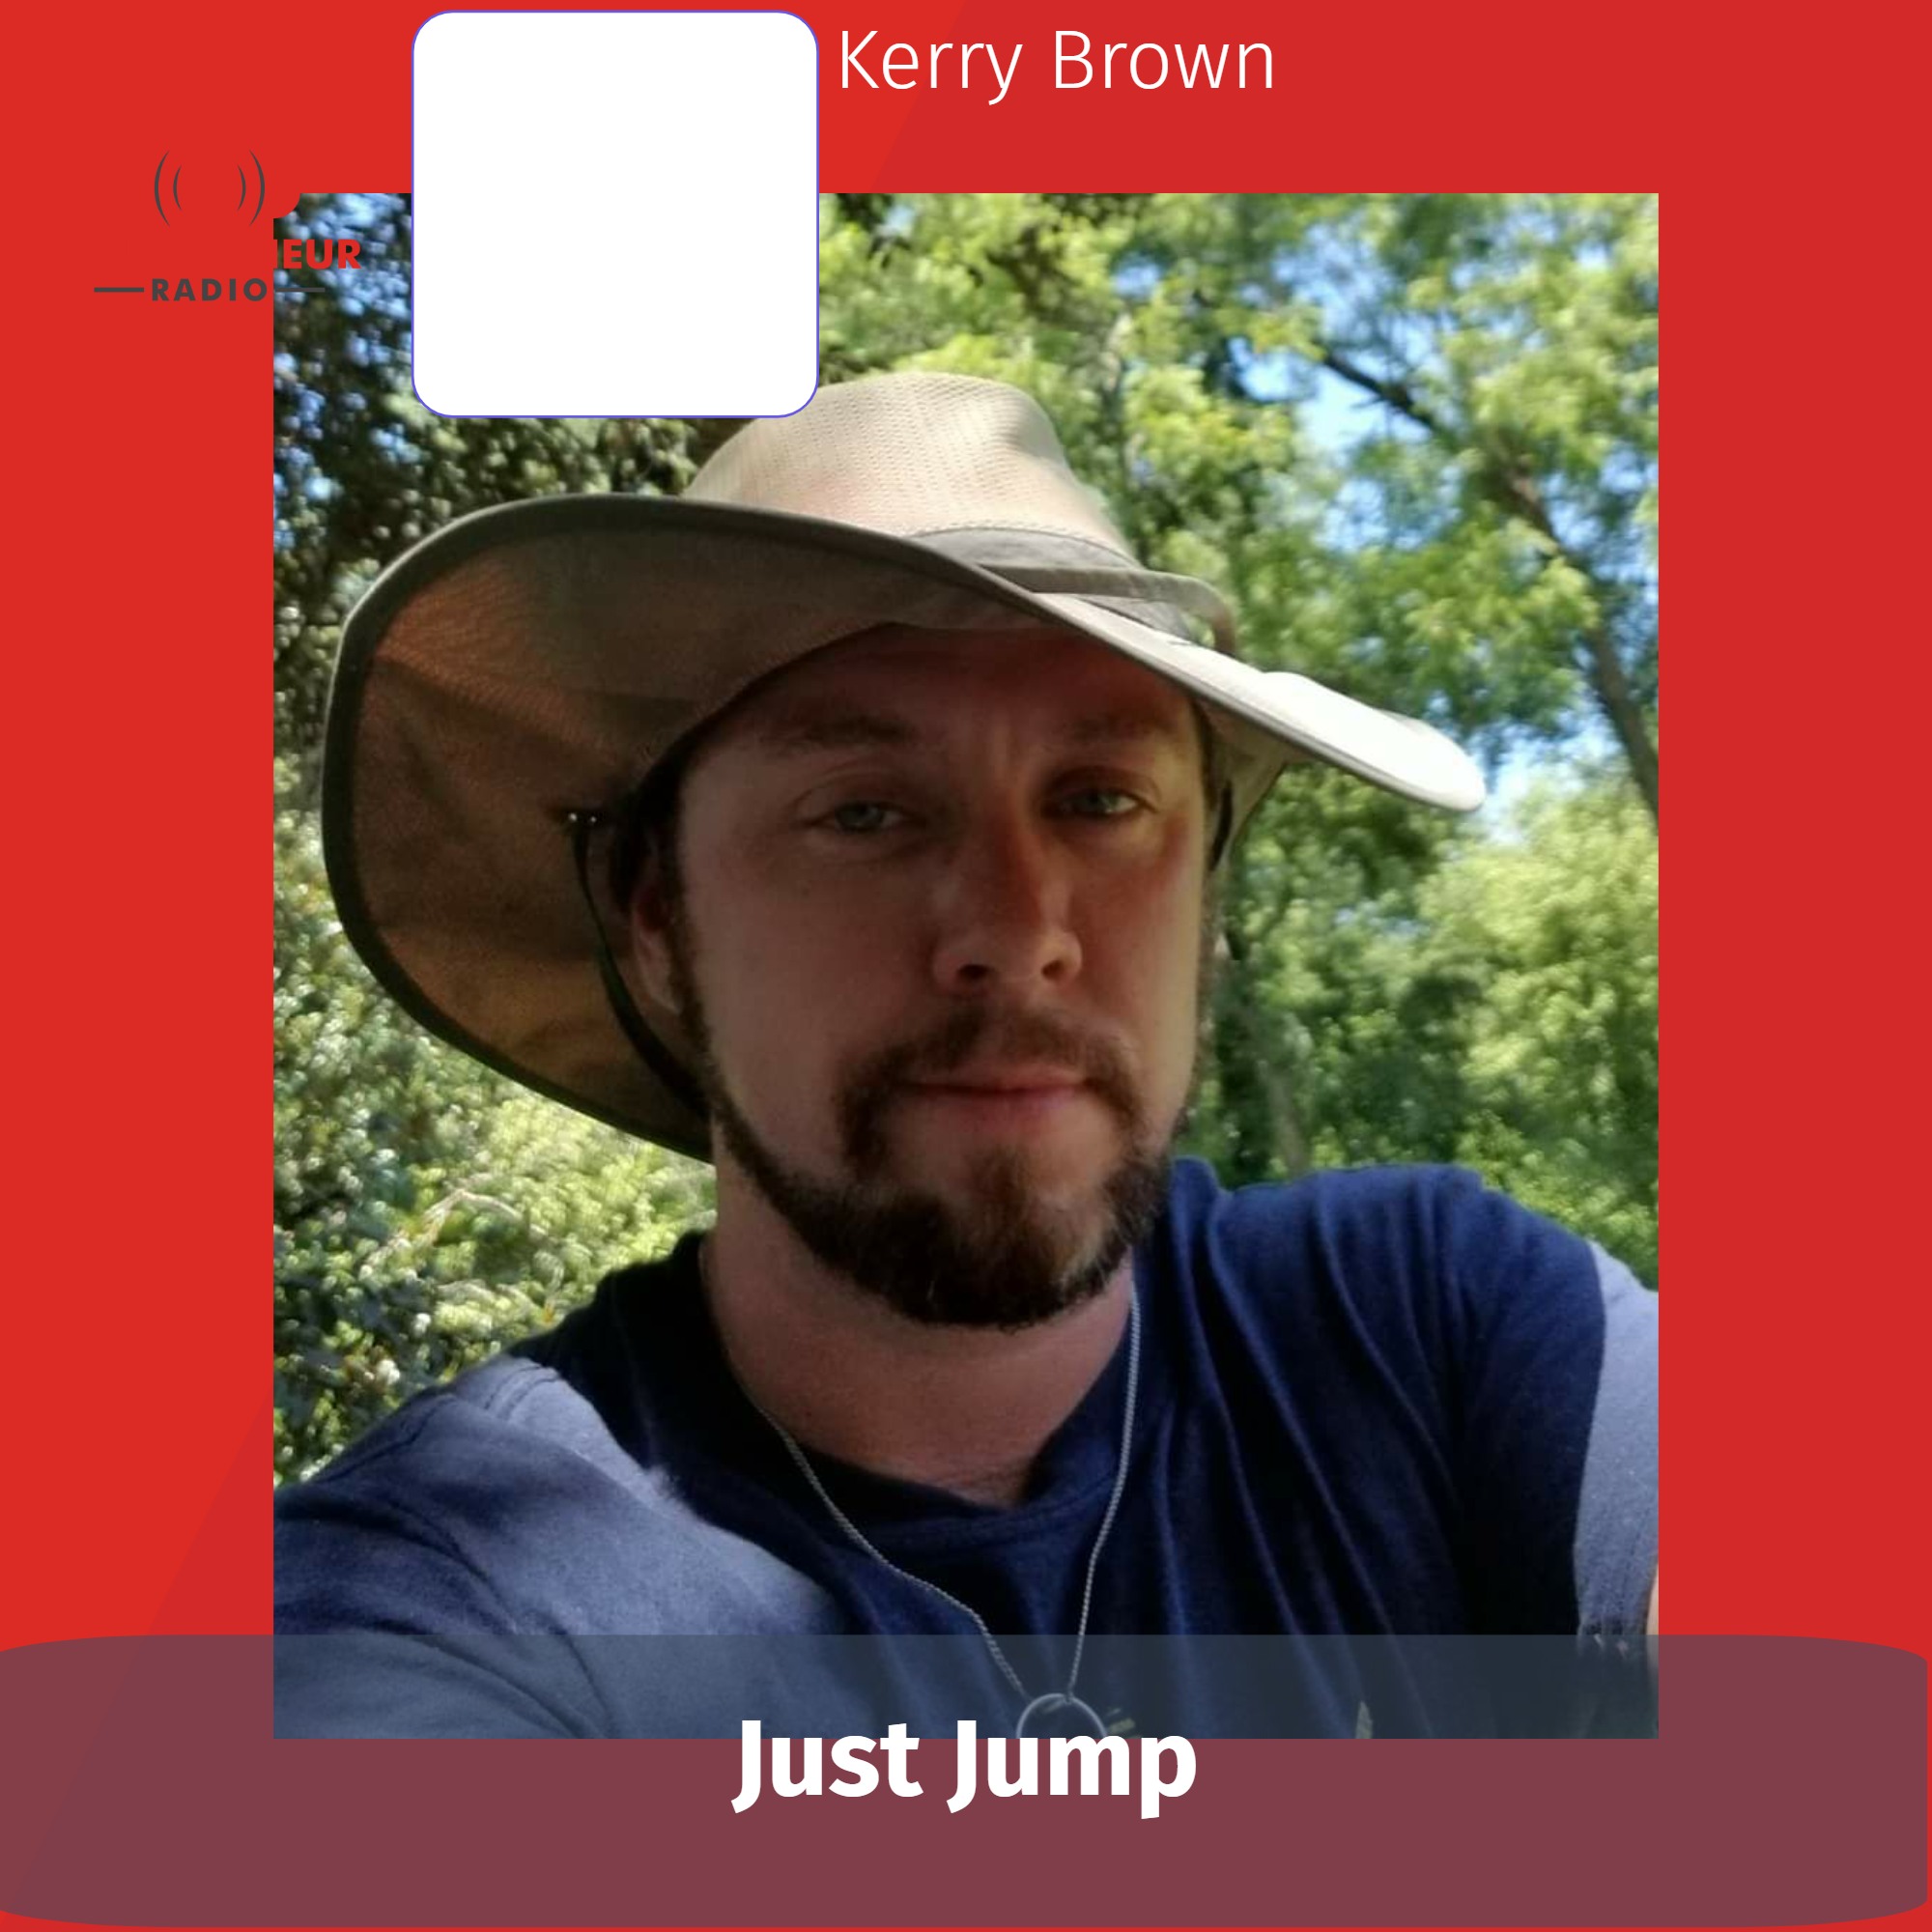 Just Jump - with Kerry Brown